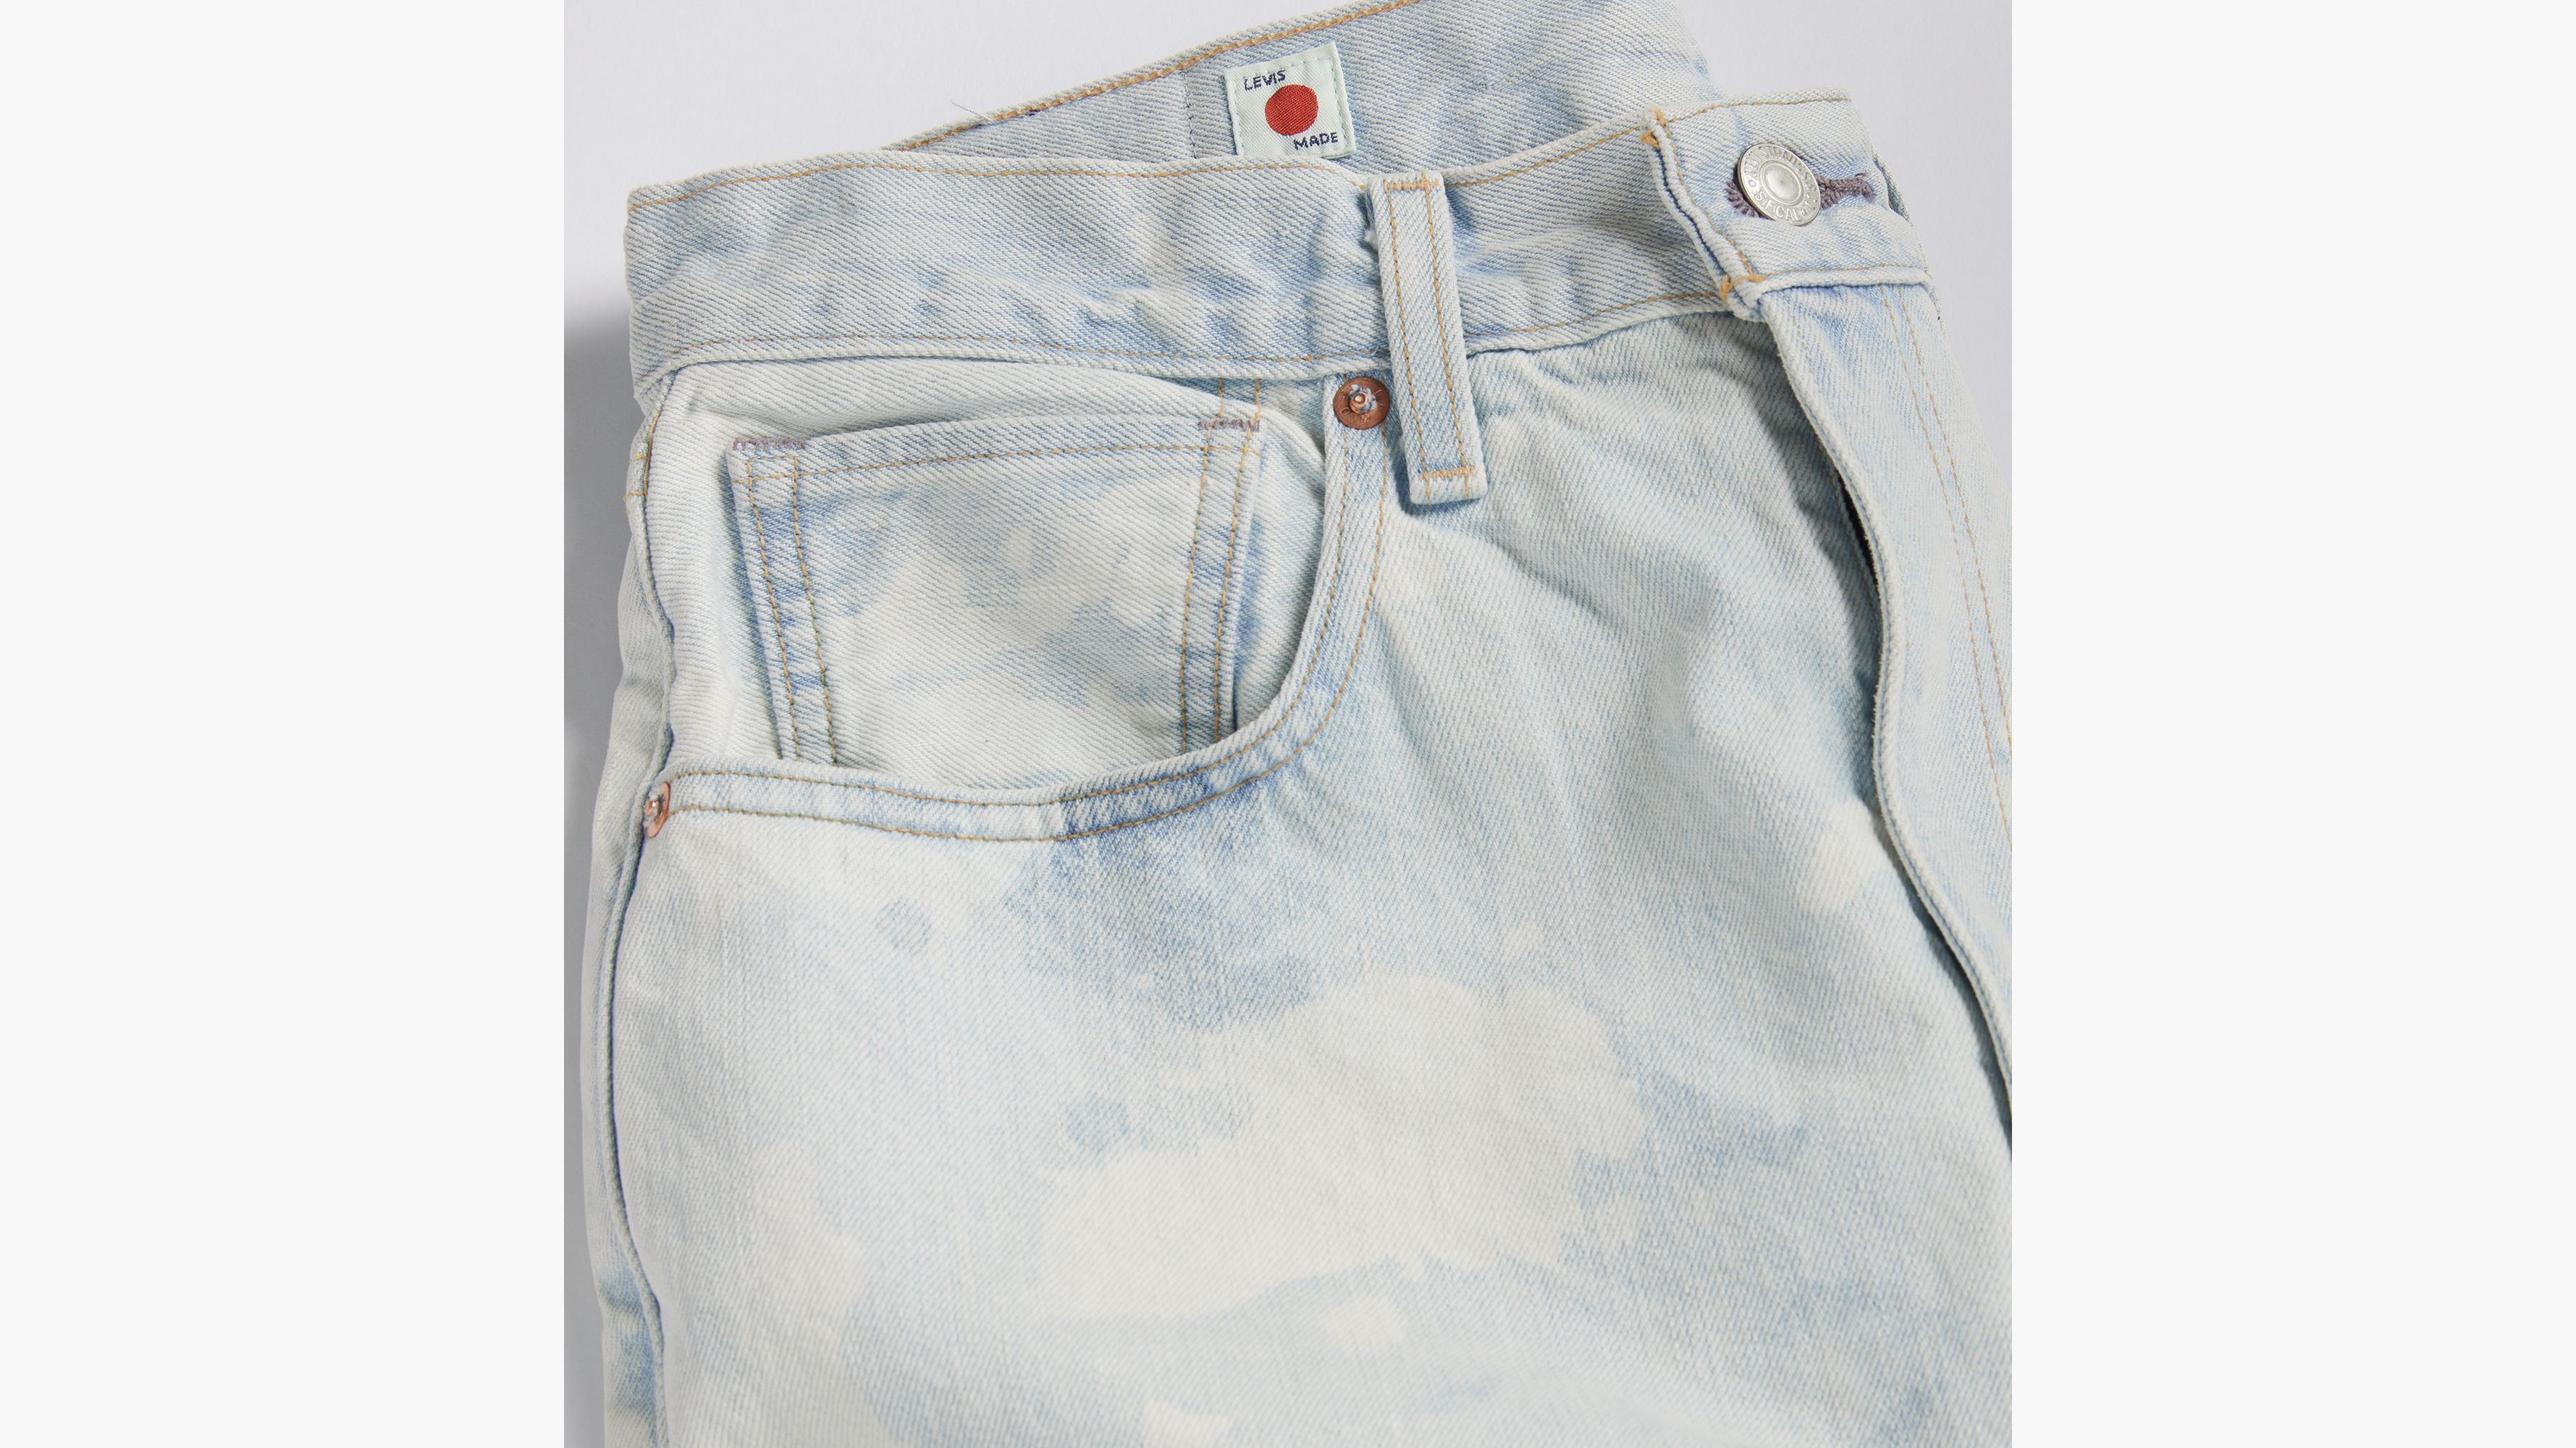 Levi's® Made in Japan Barrel Jeans